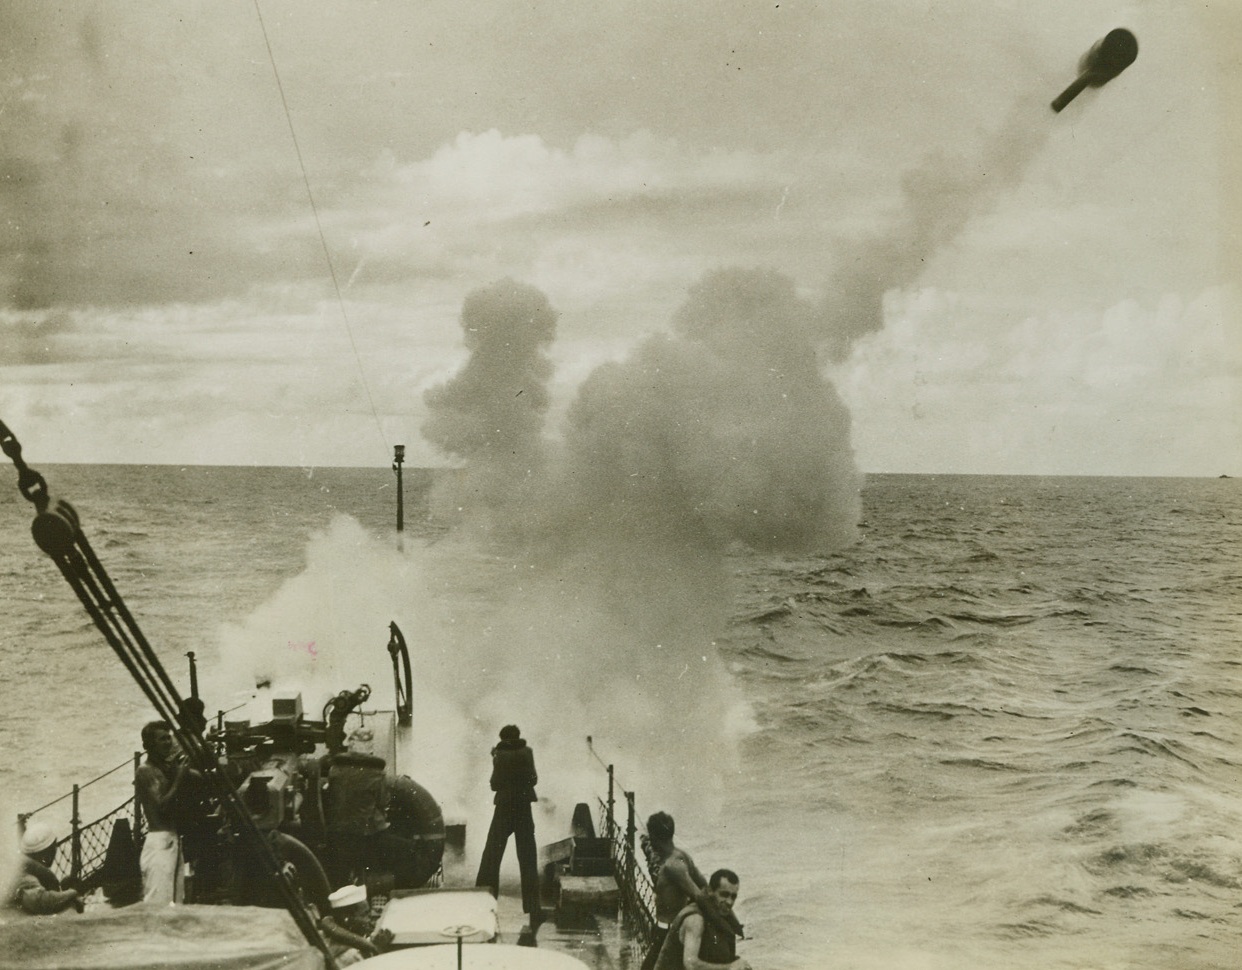 An “Ashcan” in Flight. 1/26/1943. A depth charge is fired from a “Y” gun by a RC boat patrolling the coast. Speedy, maneuverable submarine chasers like these are helping to cut the submarine shipping toll along the Atlantic coast. Credit: Official U.S. Navy Photo from ACME;